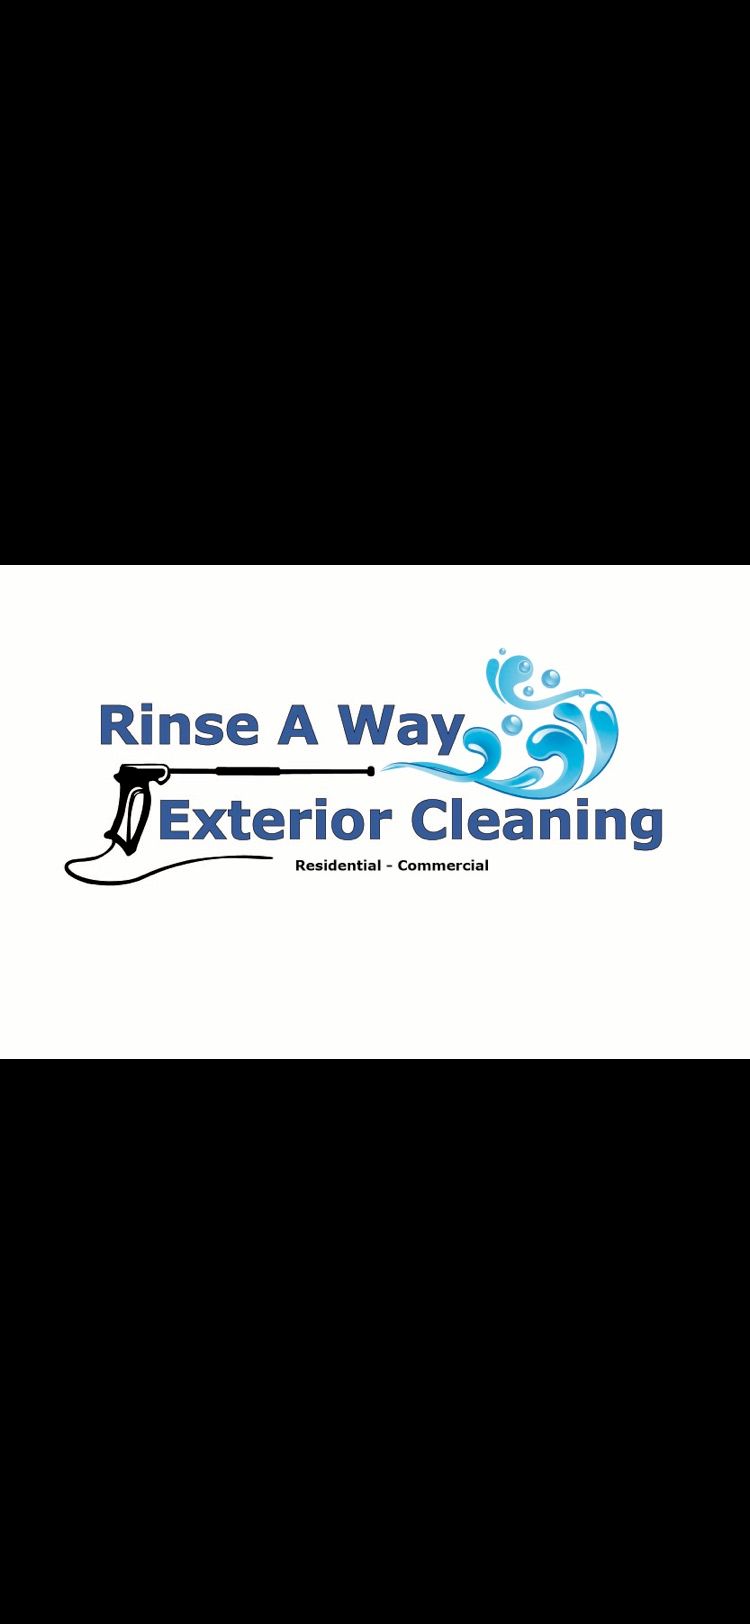 Rinse A Way Exterior Cleaning